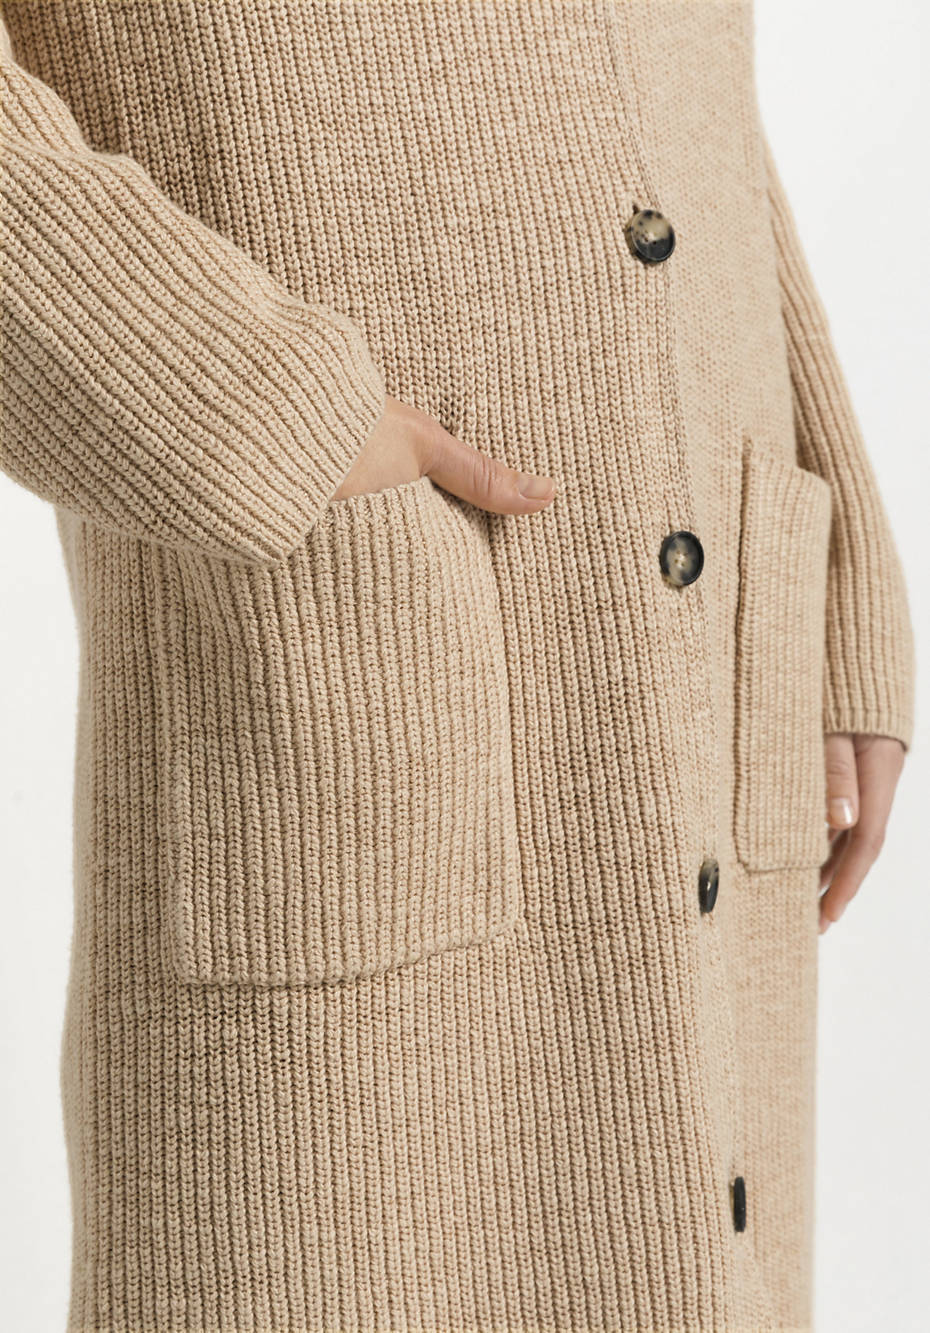 Organic cotton knitted coat with kapok